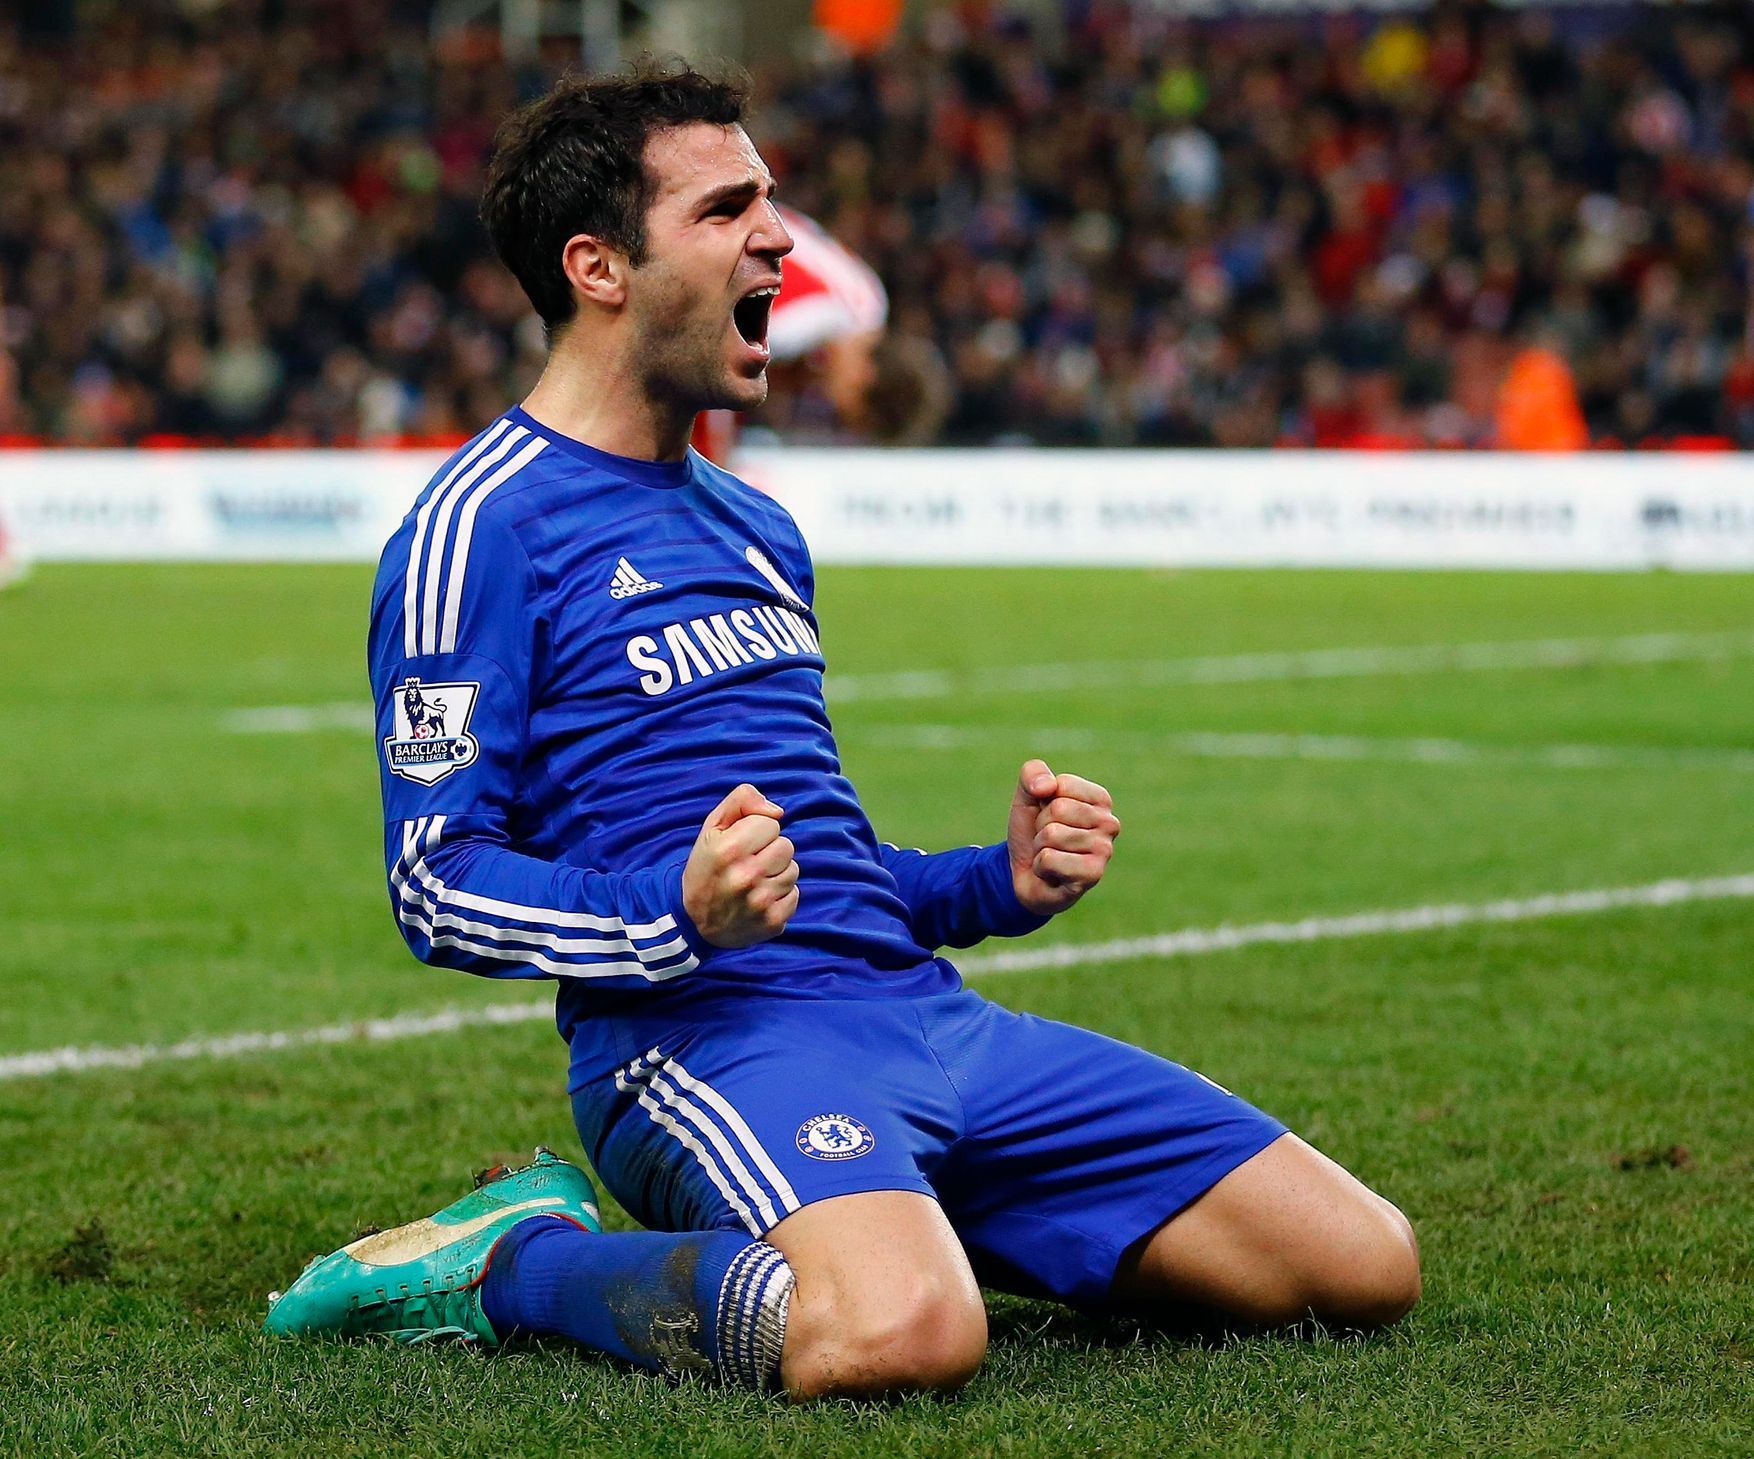 Chelsea's Fabregas celebrates after scoring the second goal during their English Premier League match against Stoke City in Stoke-on-Trent